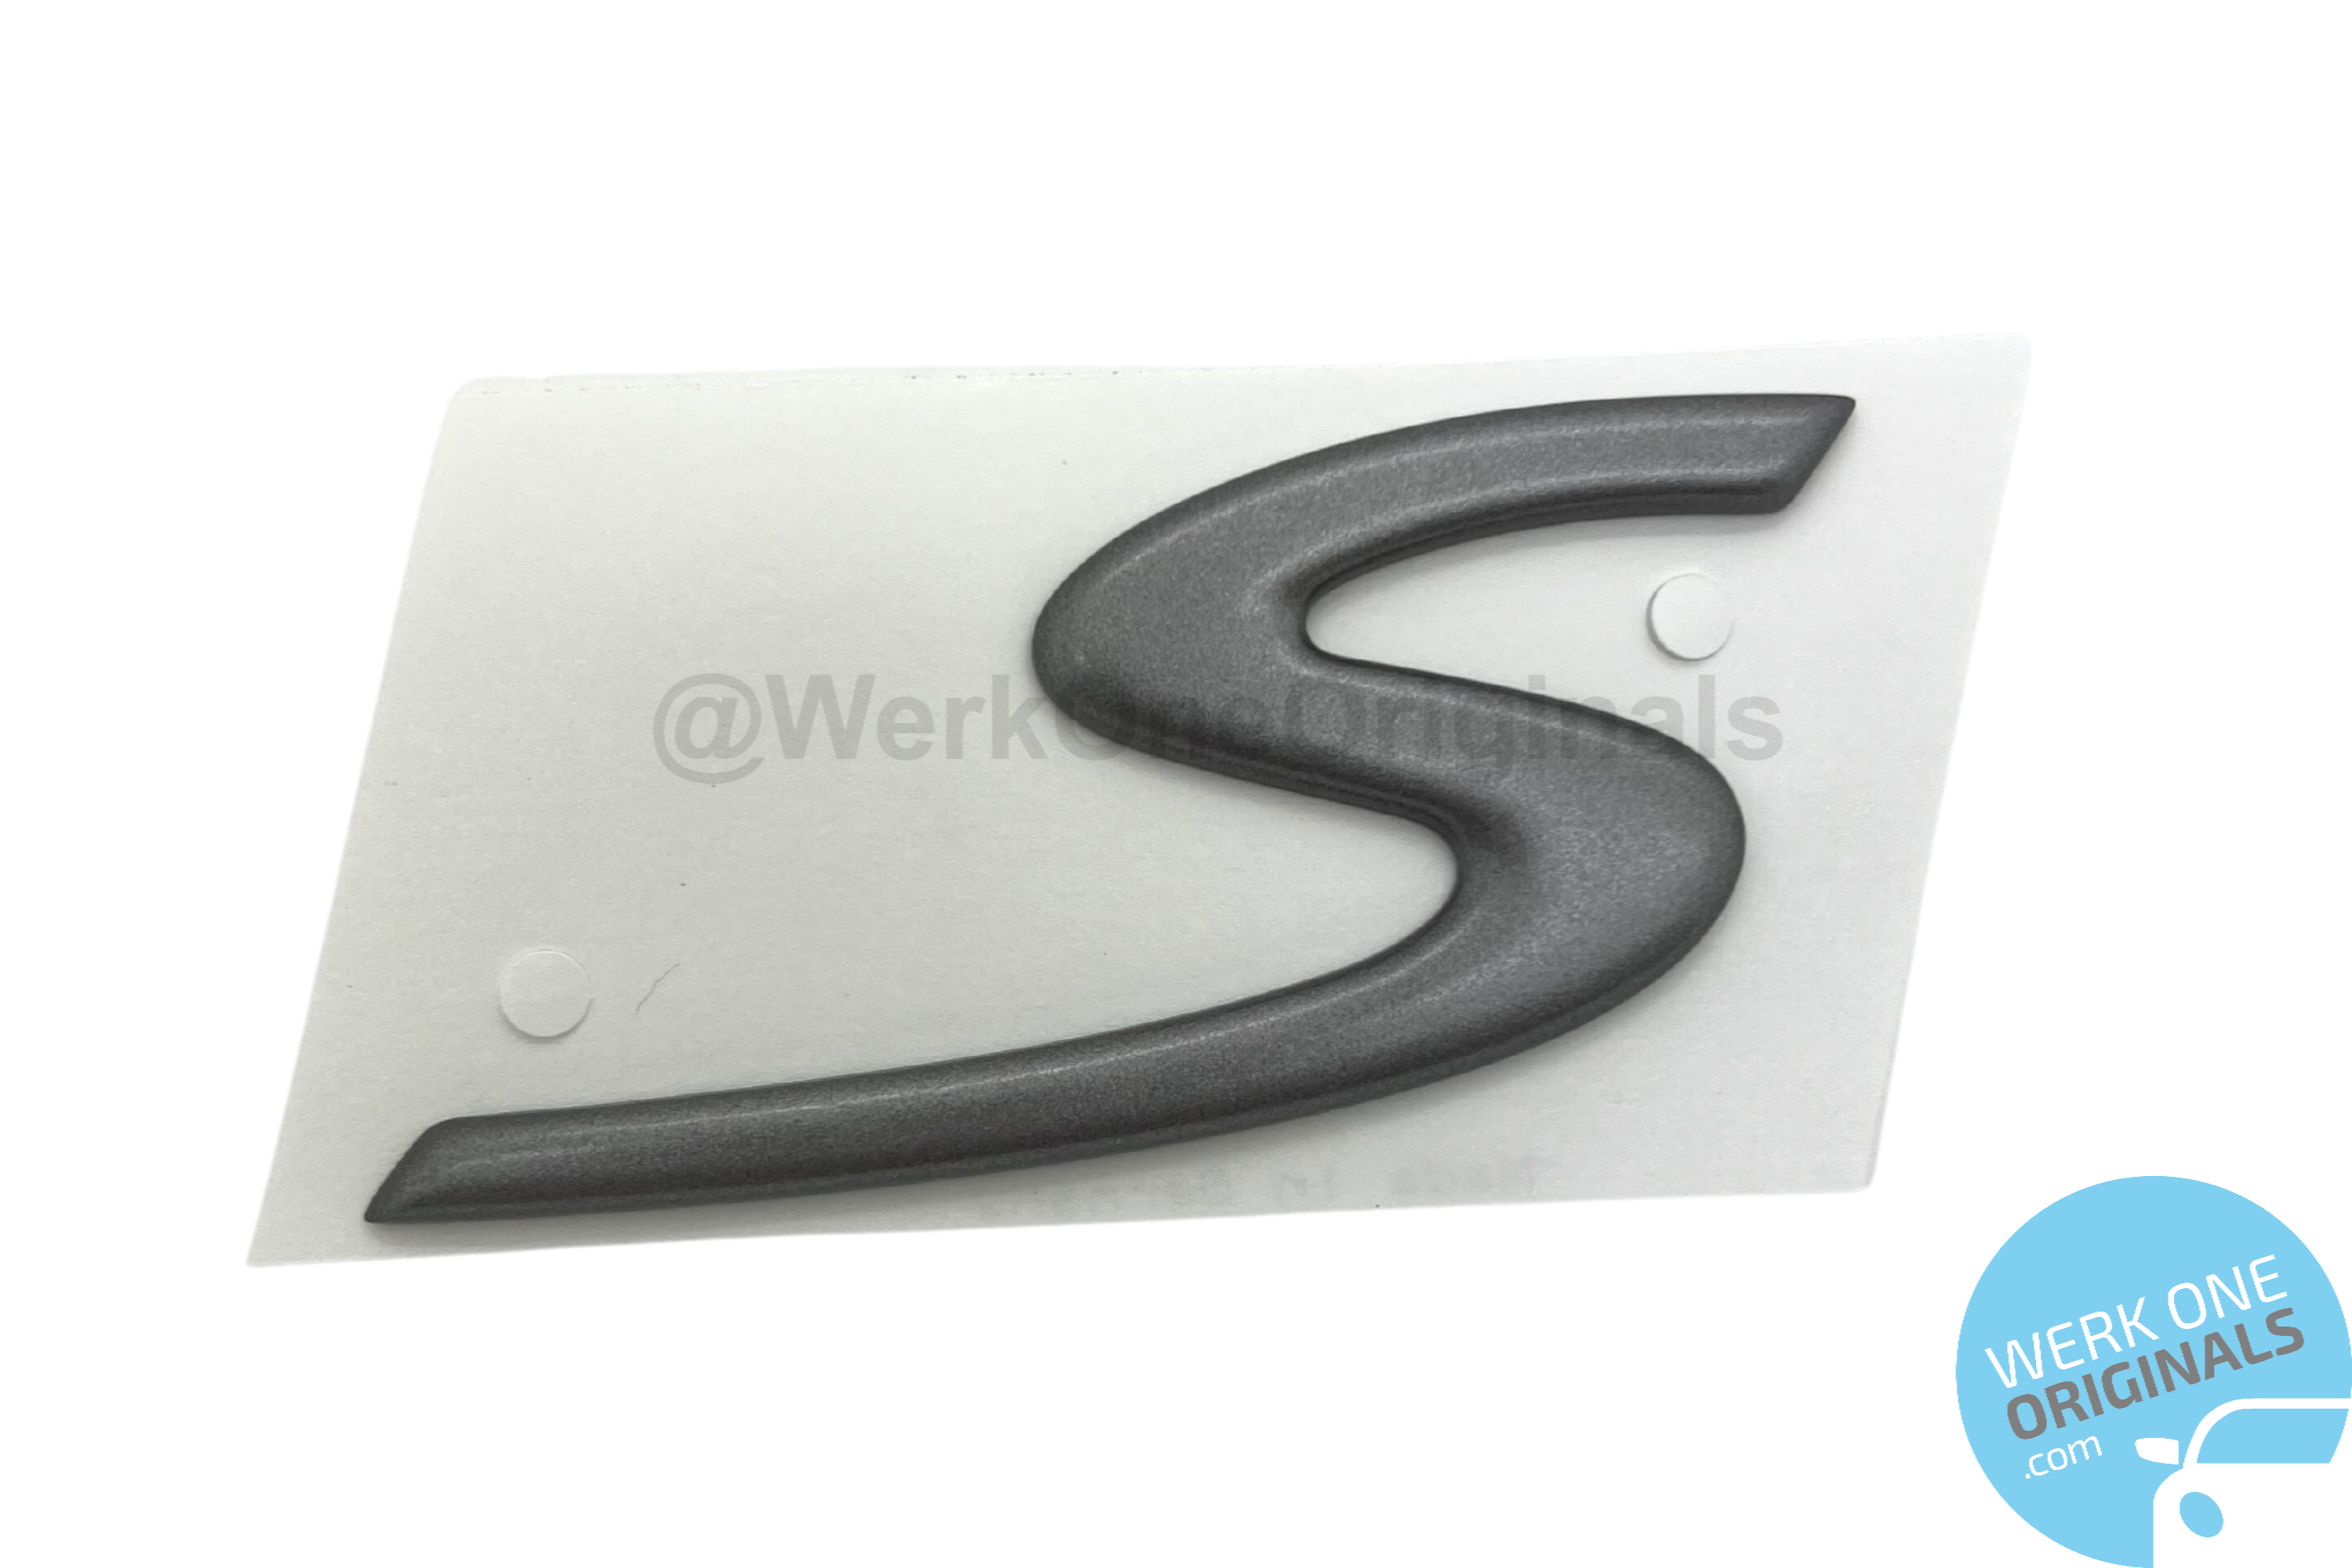 Porsche Official 'S' Rear Badge Decal in Titanium Grey for Boxster S Type 986 Models